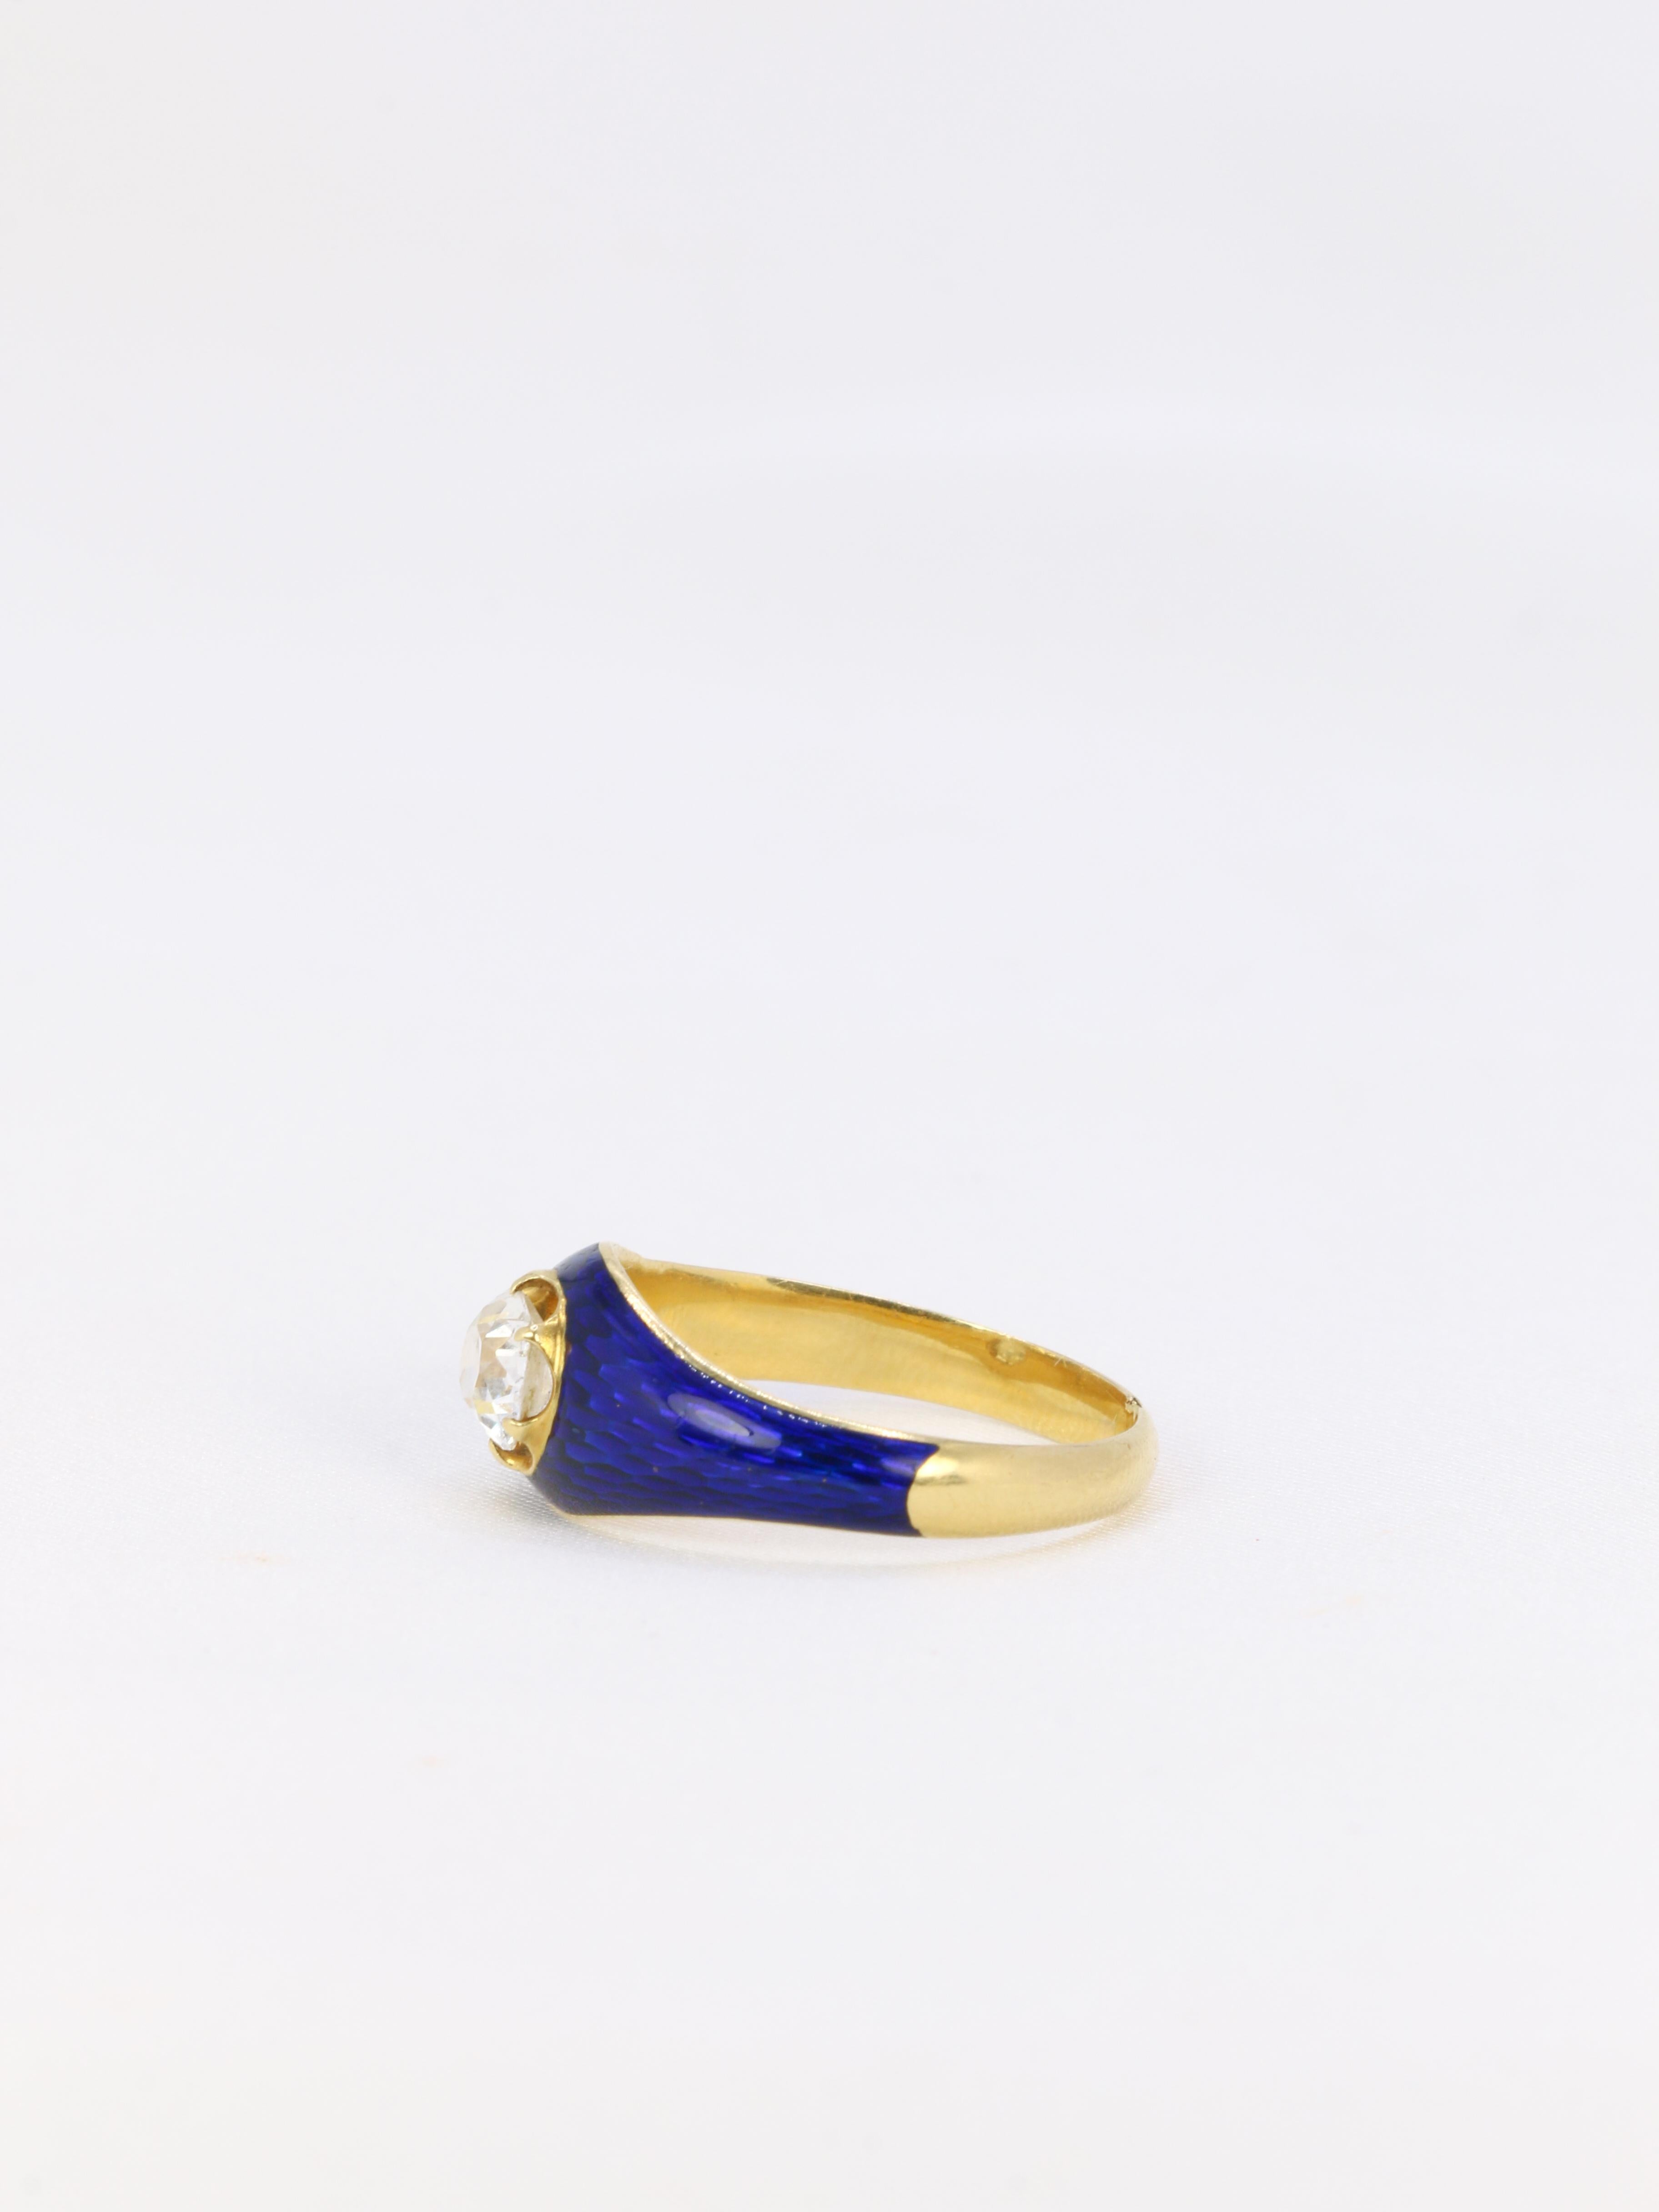 Victorian yellow gold ring with blue enamel and 0.9 ct old mine cut diamond For Sale 1